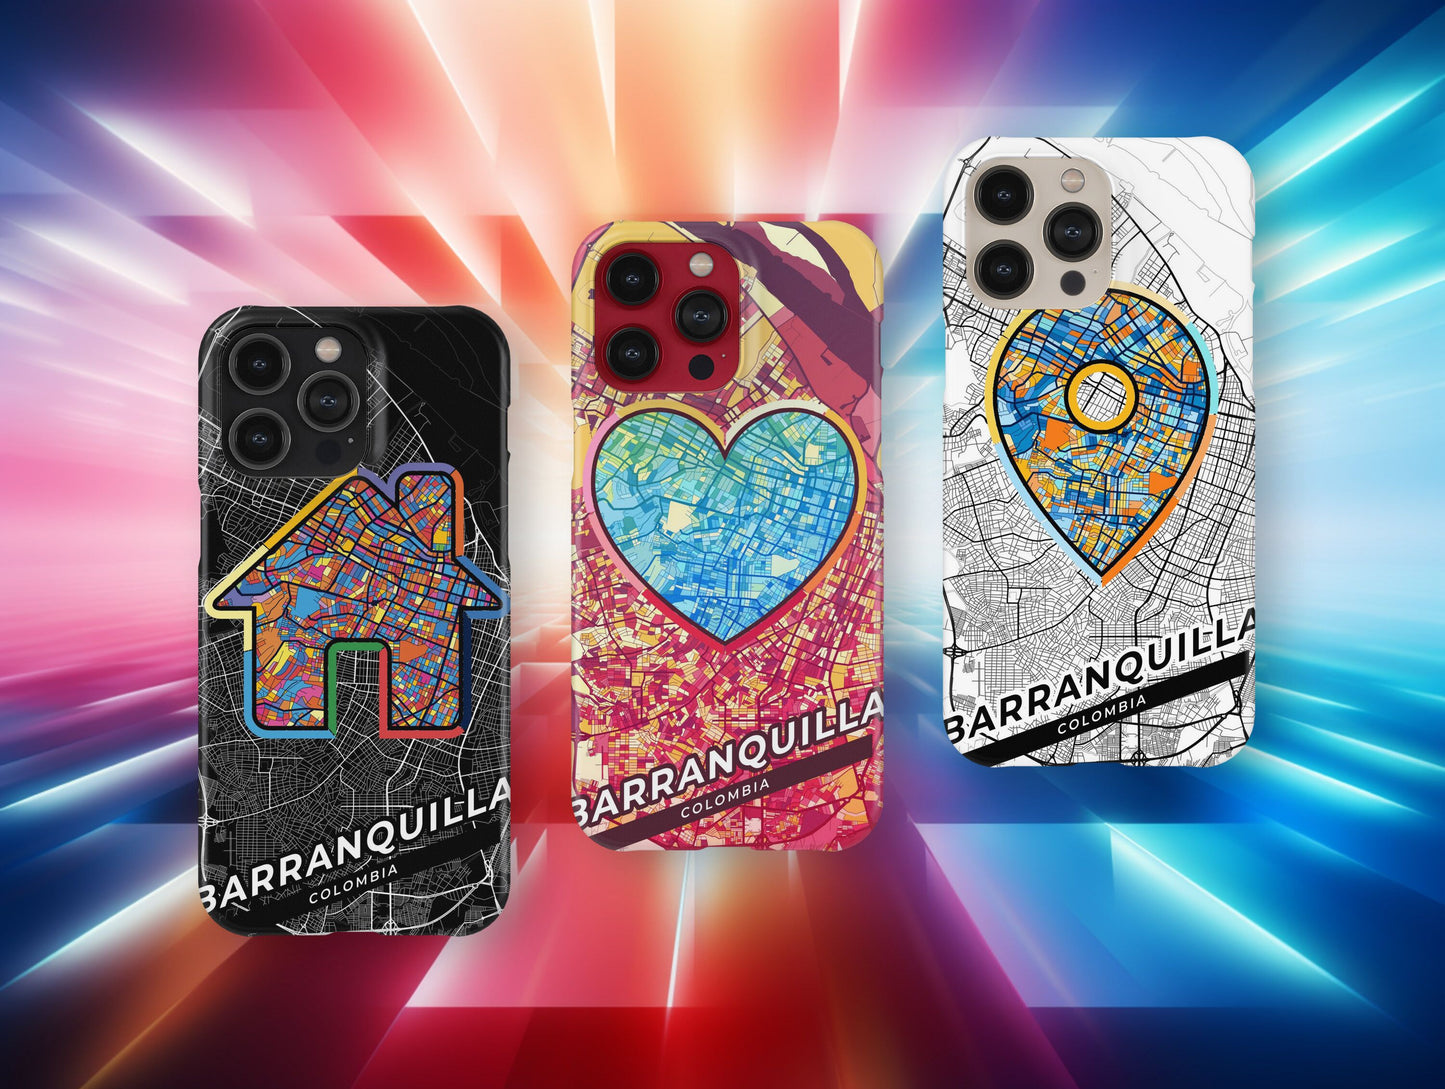 Barranquilla Colombia slim phone case with colorful icon. Birthday, wedding or housewarming gift. Couple match cases.